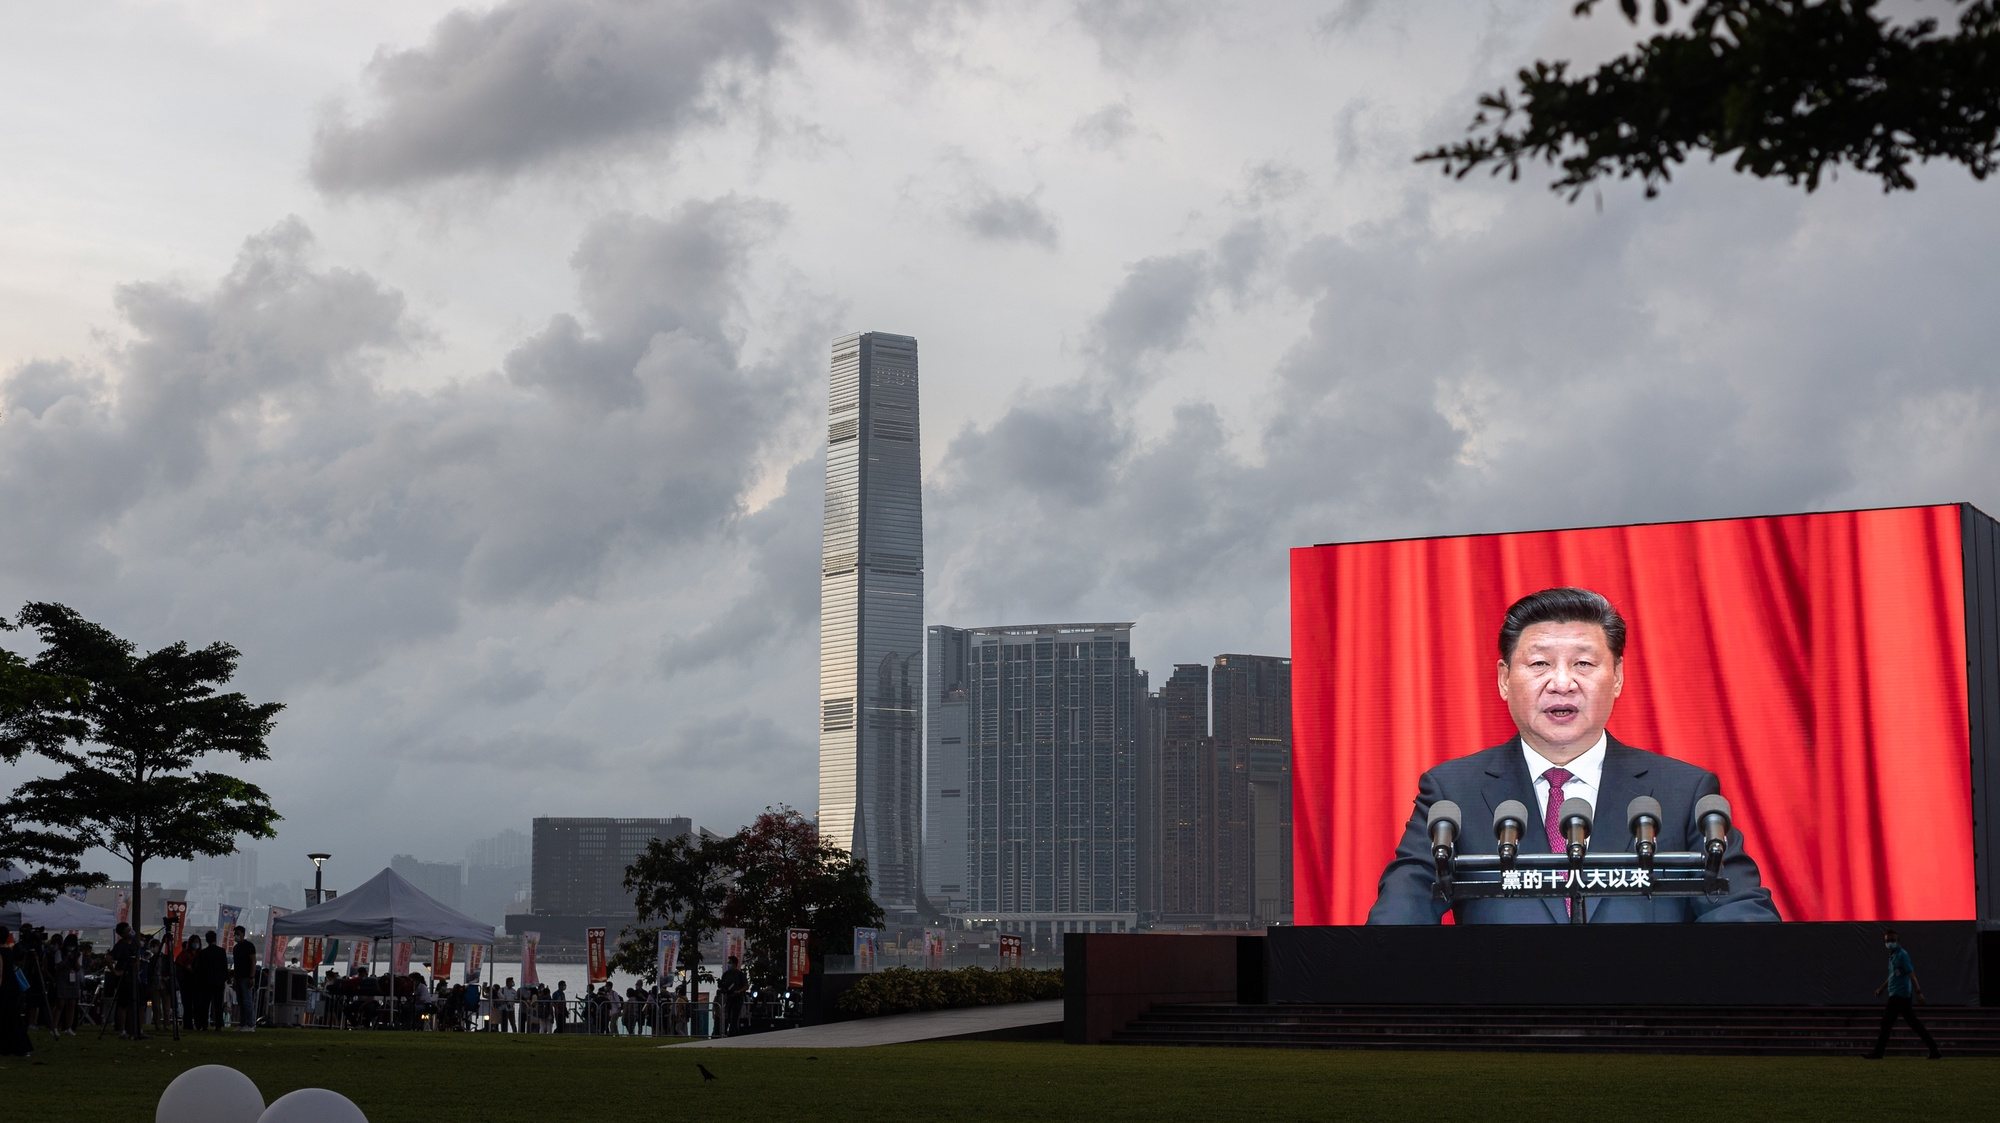 epa09315479 A screen display footage of Chinese President Xi Jinping during a pro-China event in Tamar Park in Hong Kong, China, 01 July 2021. On 01 July 2021 Hong Kong celebrates the anniversary of the establishment of the Hong Kong SAR and also the 100th anniversary of the founding of the Communist Party of China (CCP).  EPA/JEROME FAVRE